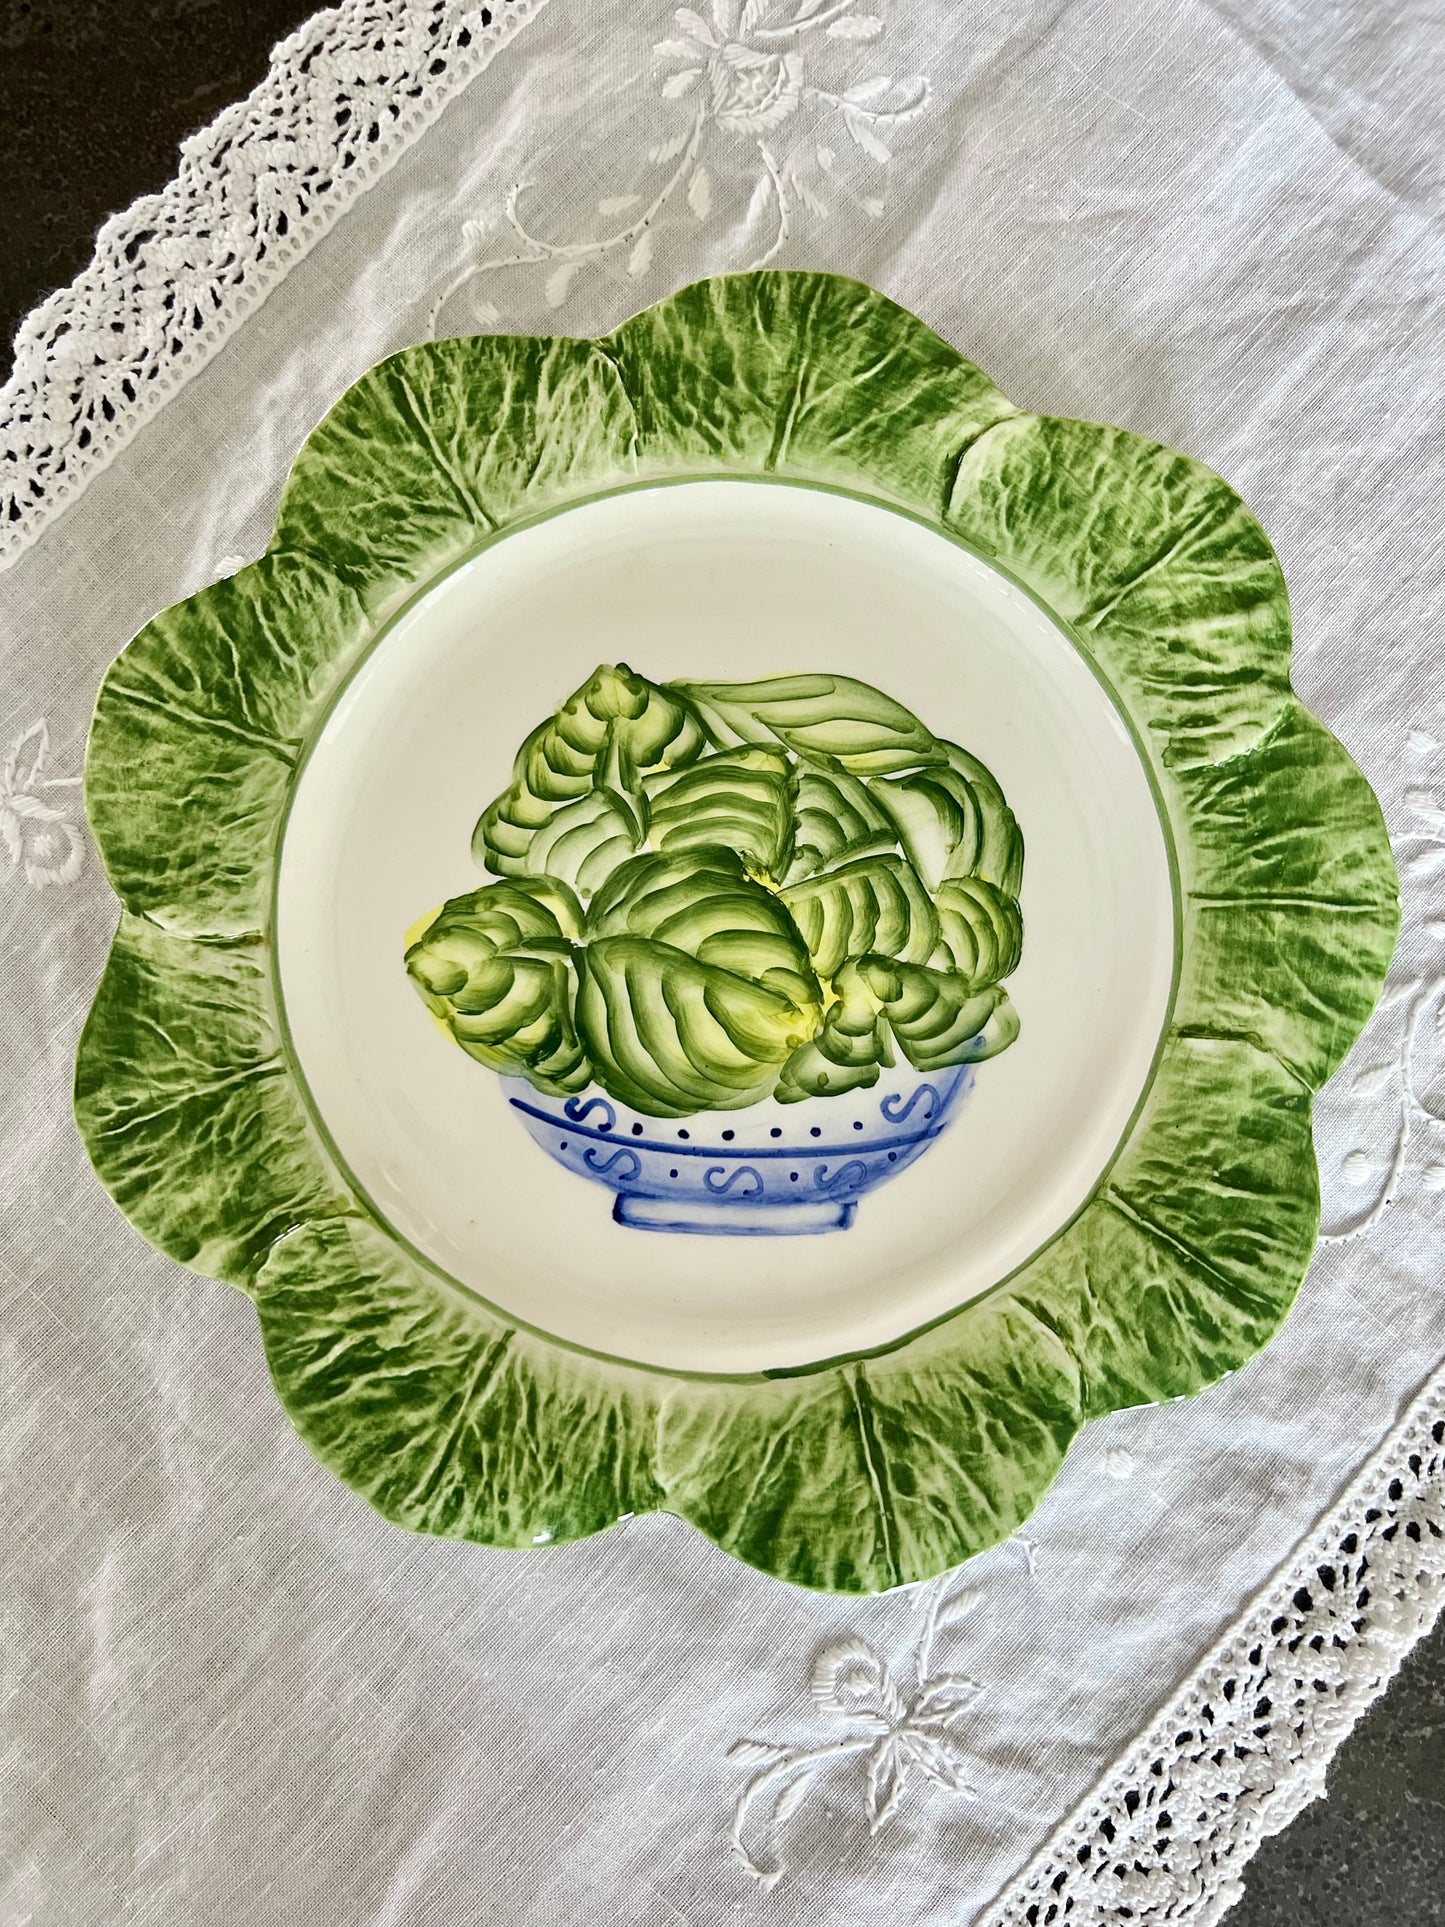 Italian Ceramic Cabbage Plate by San Marco - 8.25”